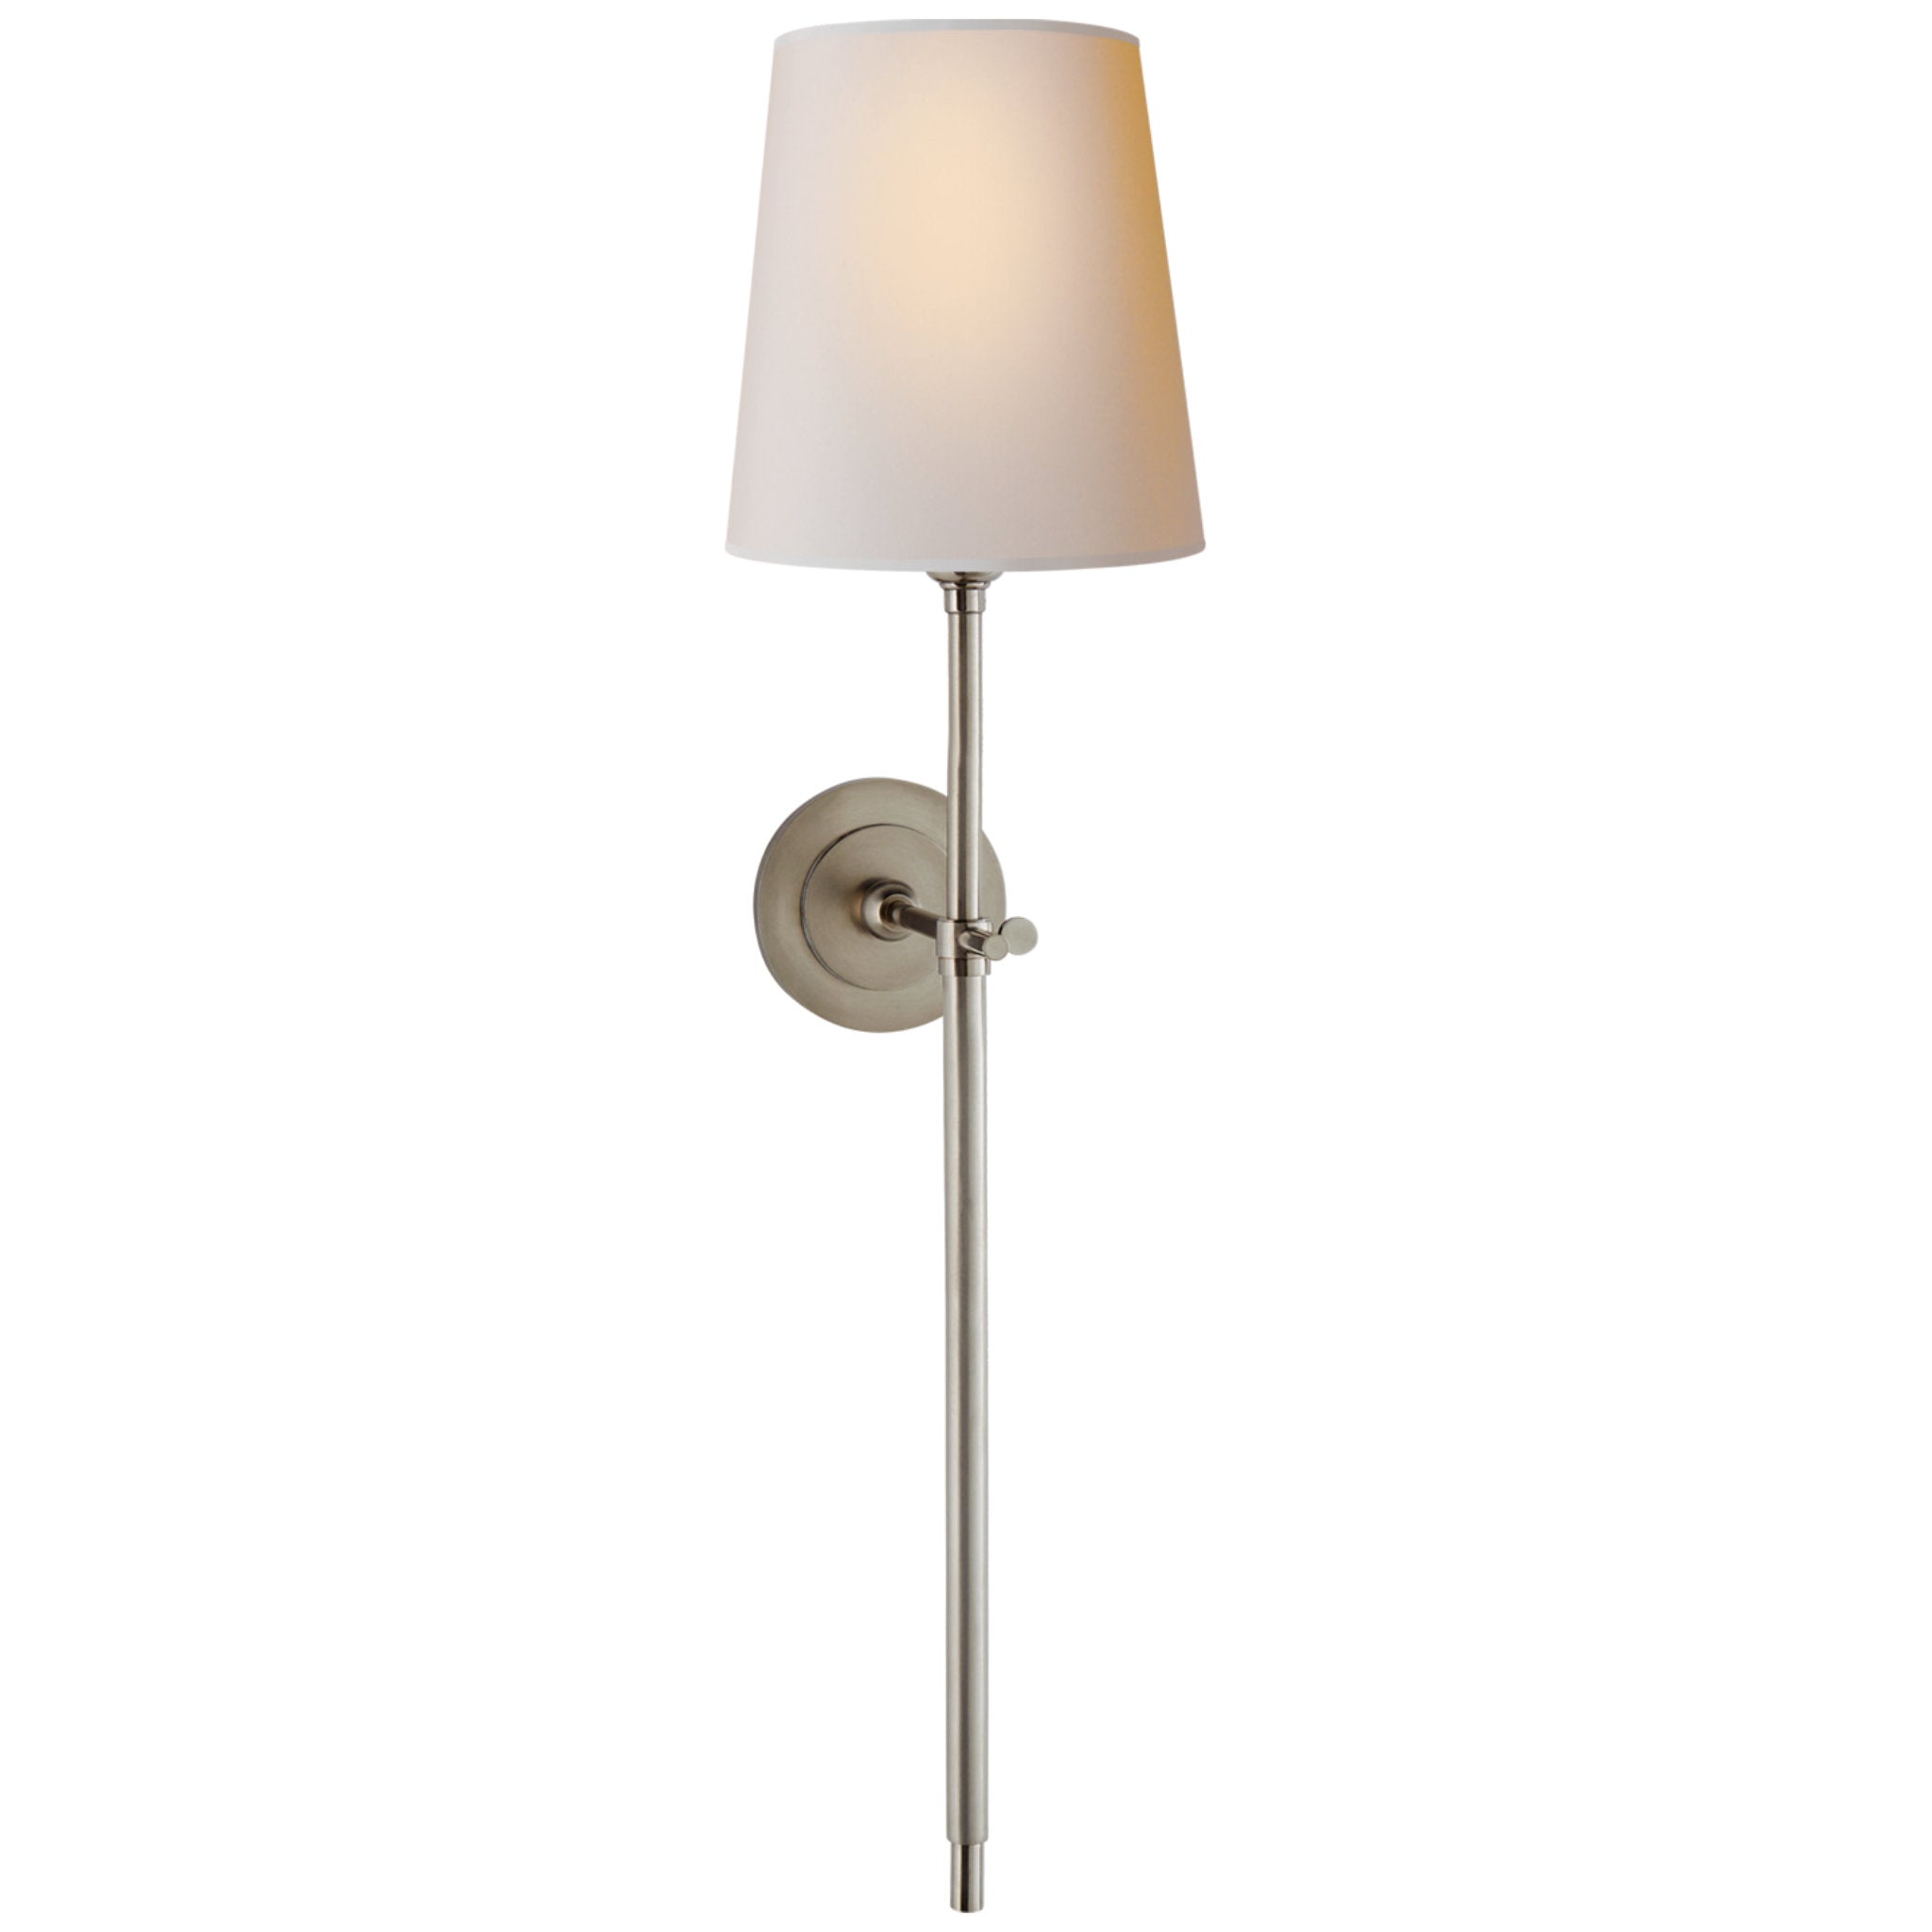 Thomas O'Brien Bryant Large Tail Sconce in Antique Nickel with Natural Paper Shade